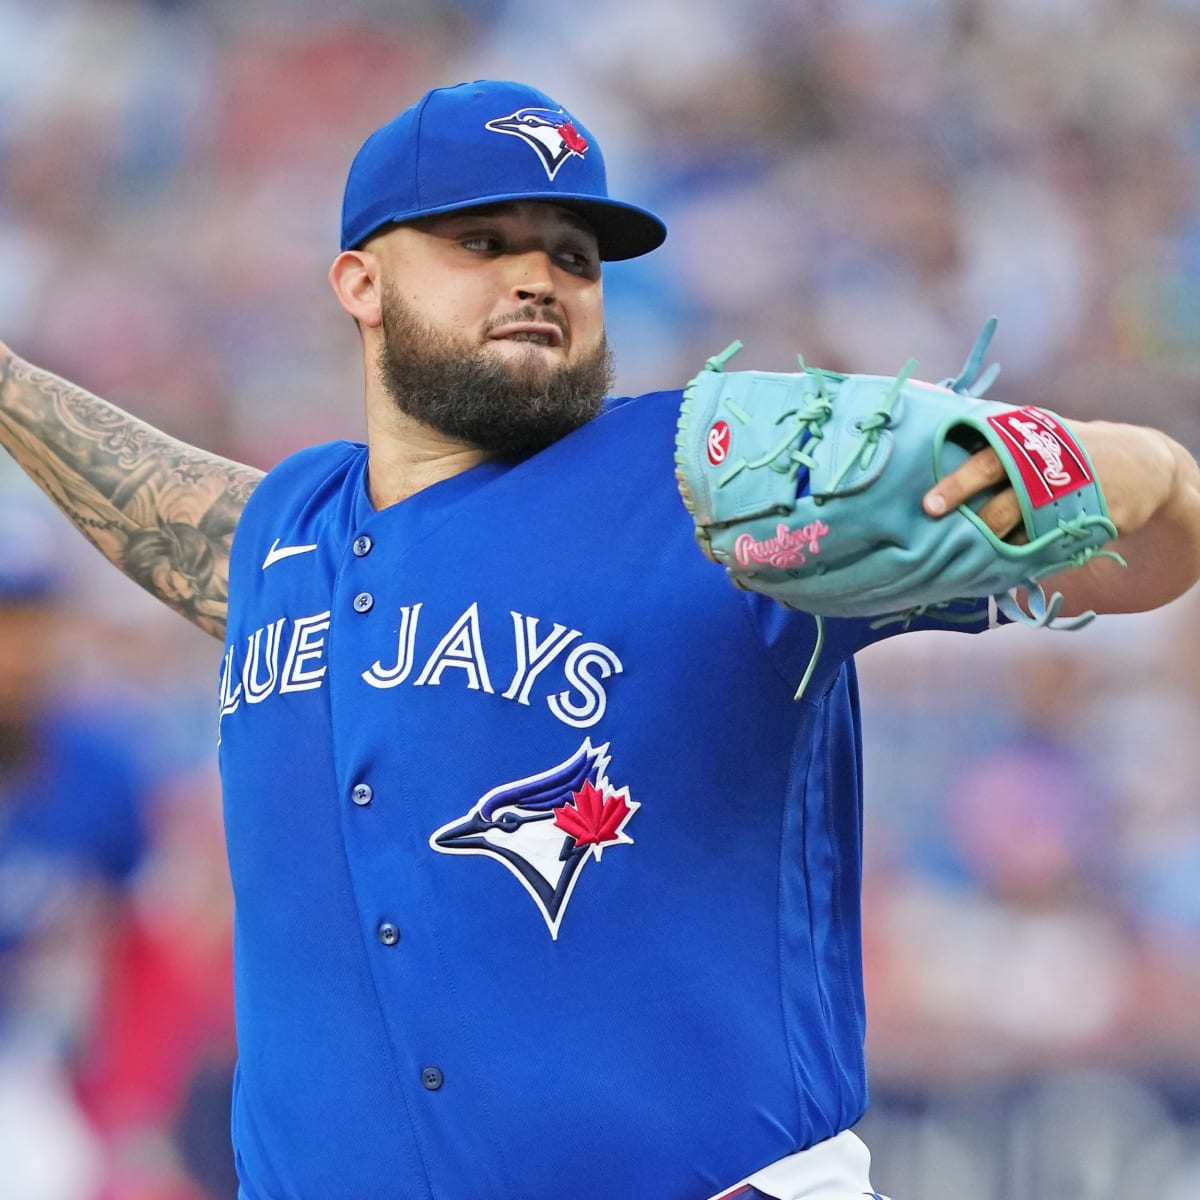 All in with the Blue Jays and their ace Alek Manoah: Best bets for